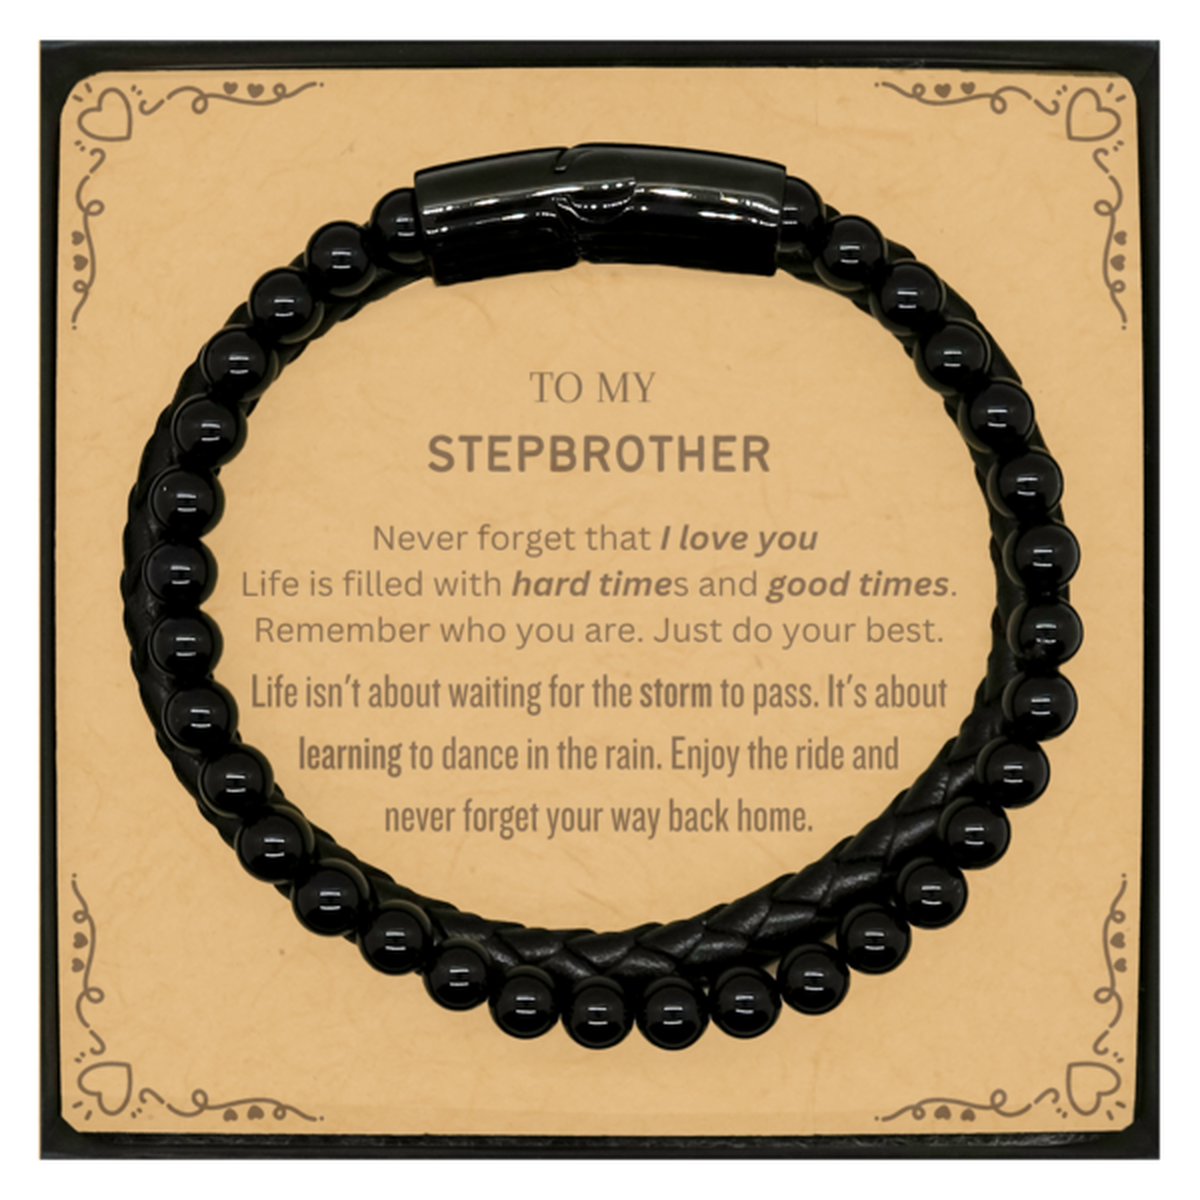 Christmas Stepbrother Stone Leather Bracelets Gifts, To My Stepbrother Birthday Thank You Gifts For Stepbrother, Graduation Unique Gifts For Stepbrother To My Stepbrother Never forget that I love you life is filled with hard times and good times. Remember